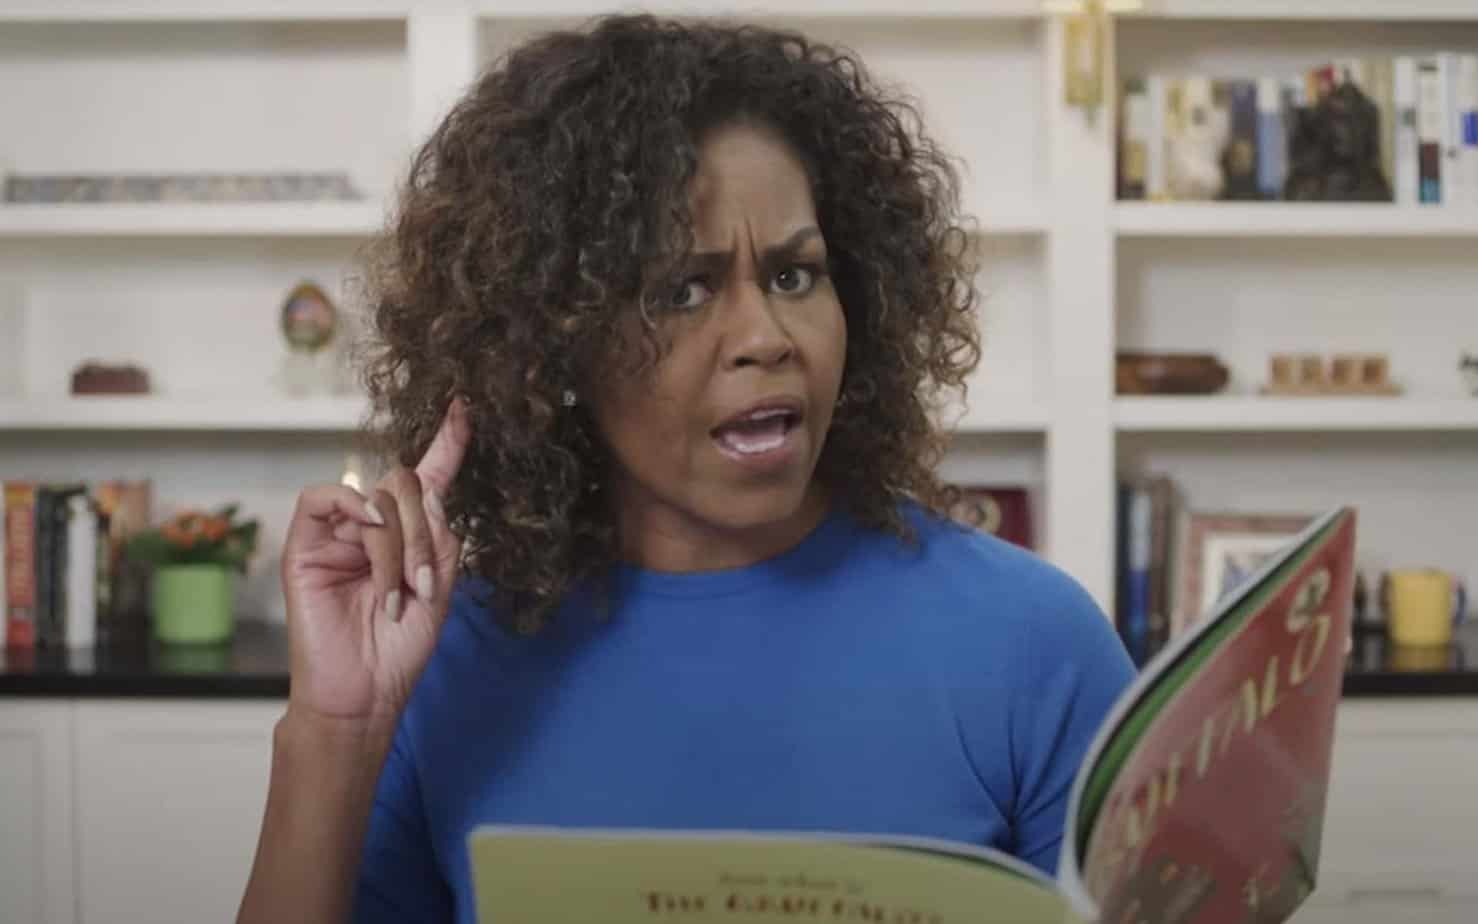 Michelle Obama Reads Bedtime Stories - Assisting kids to stay calm during COVID